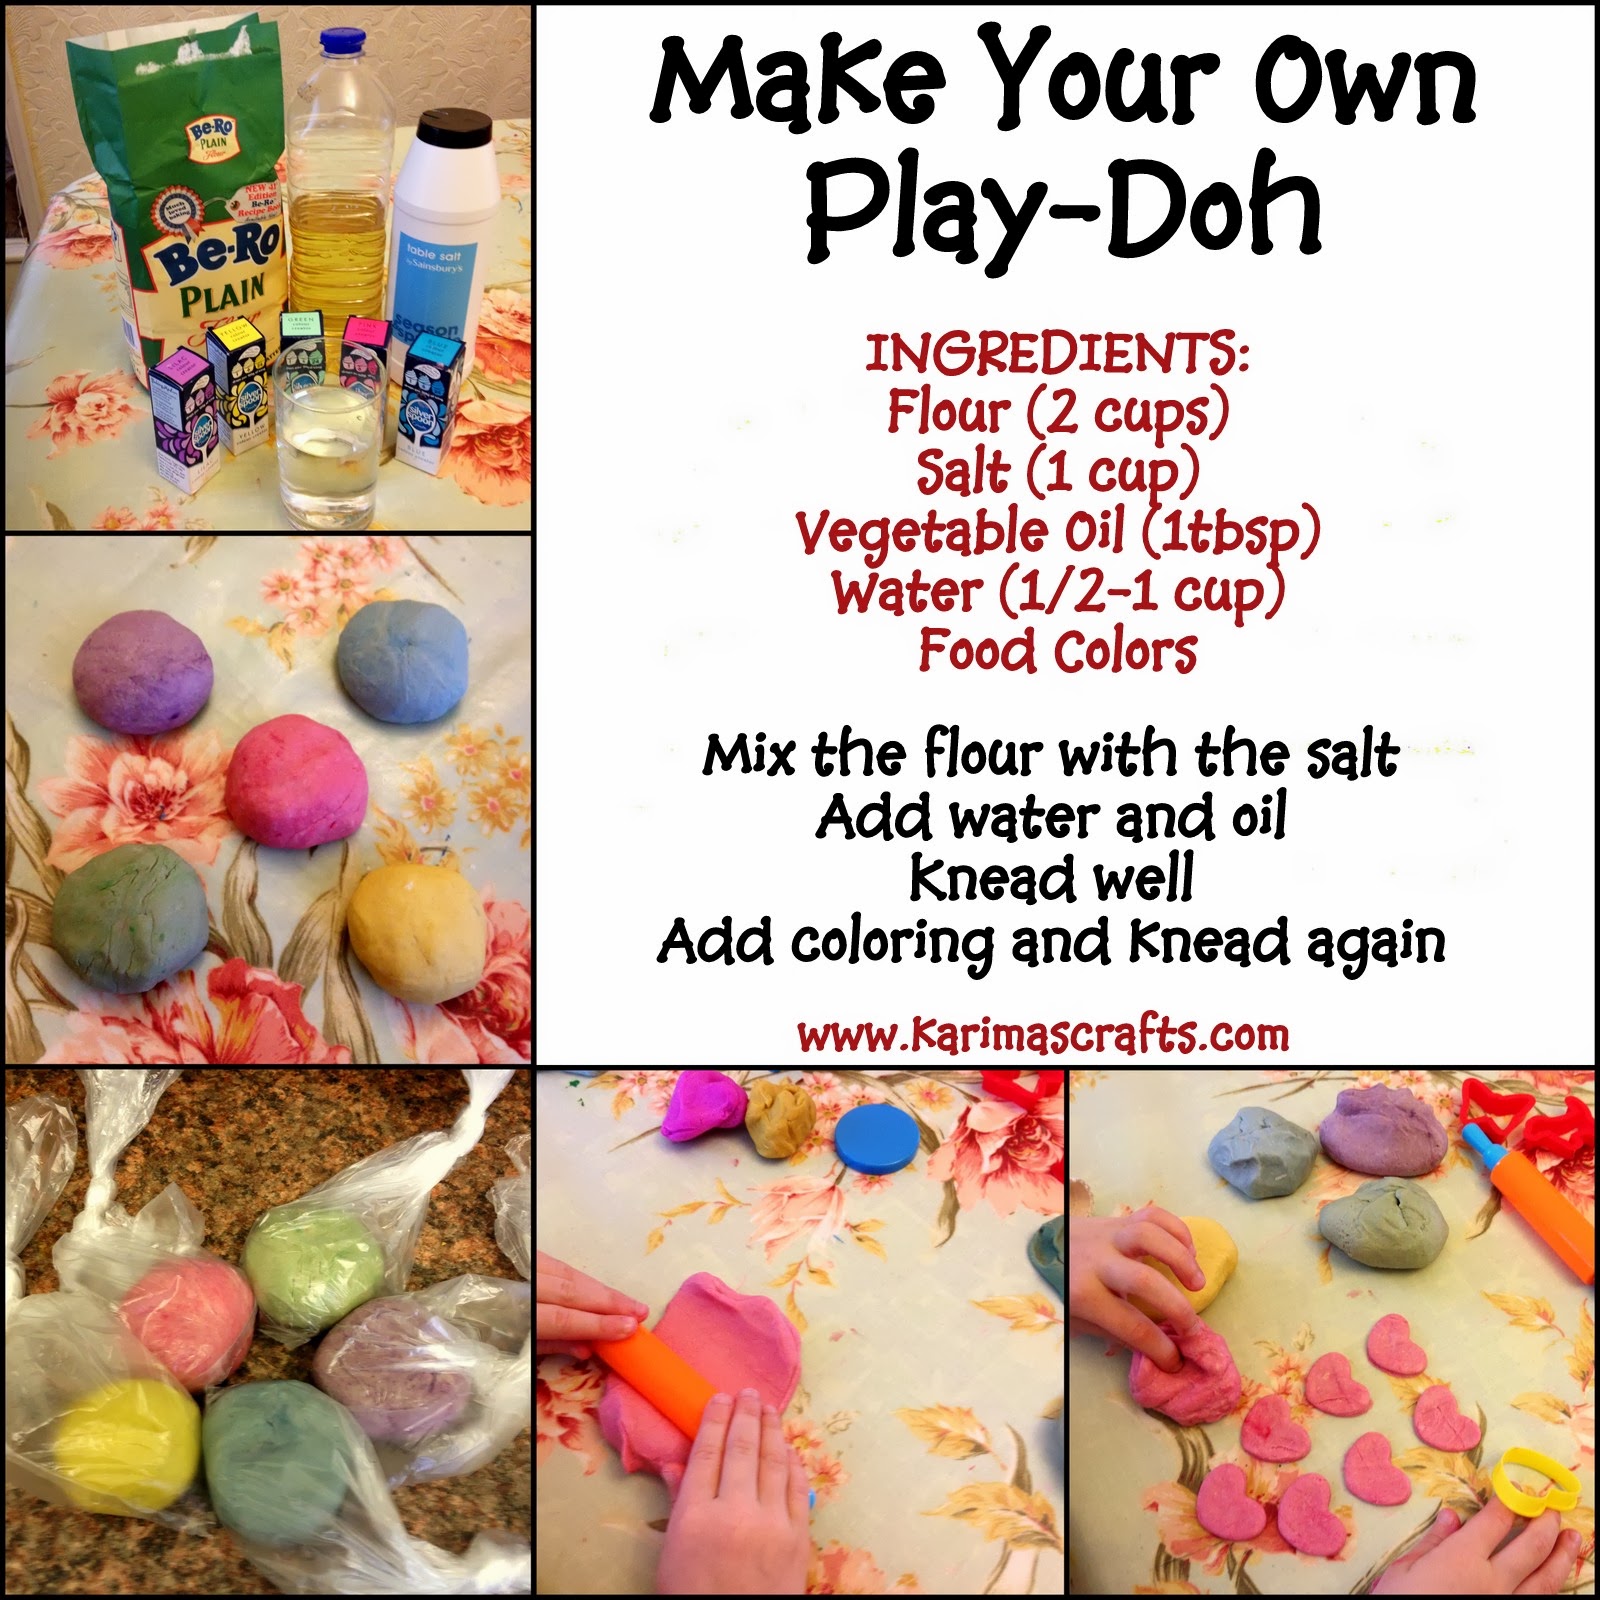 karima-s-crafts-make-your-own-play-doh-recipe